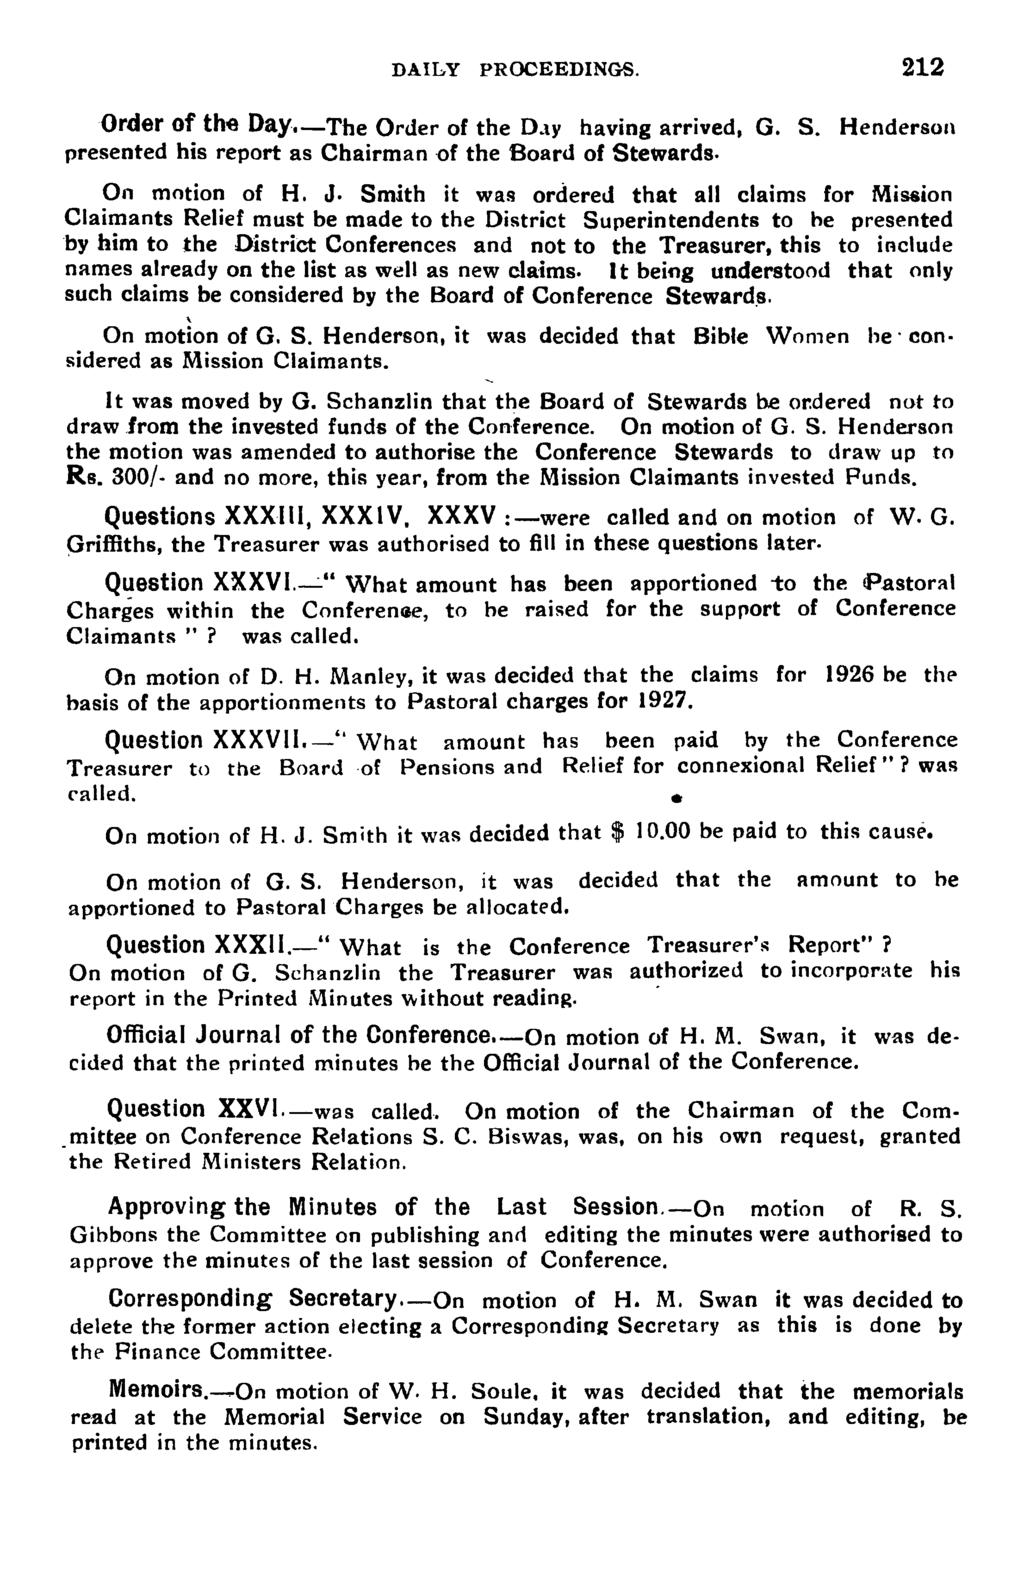 DAILY PROCEEDINGS. 212 Order of the DaY.-The Order of the D.1Y having arrived, G. S. Henderson presented his report as Chairman of the Board of Stewards. On motion of H. J.